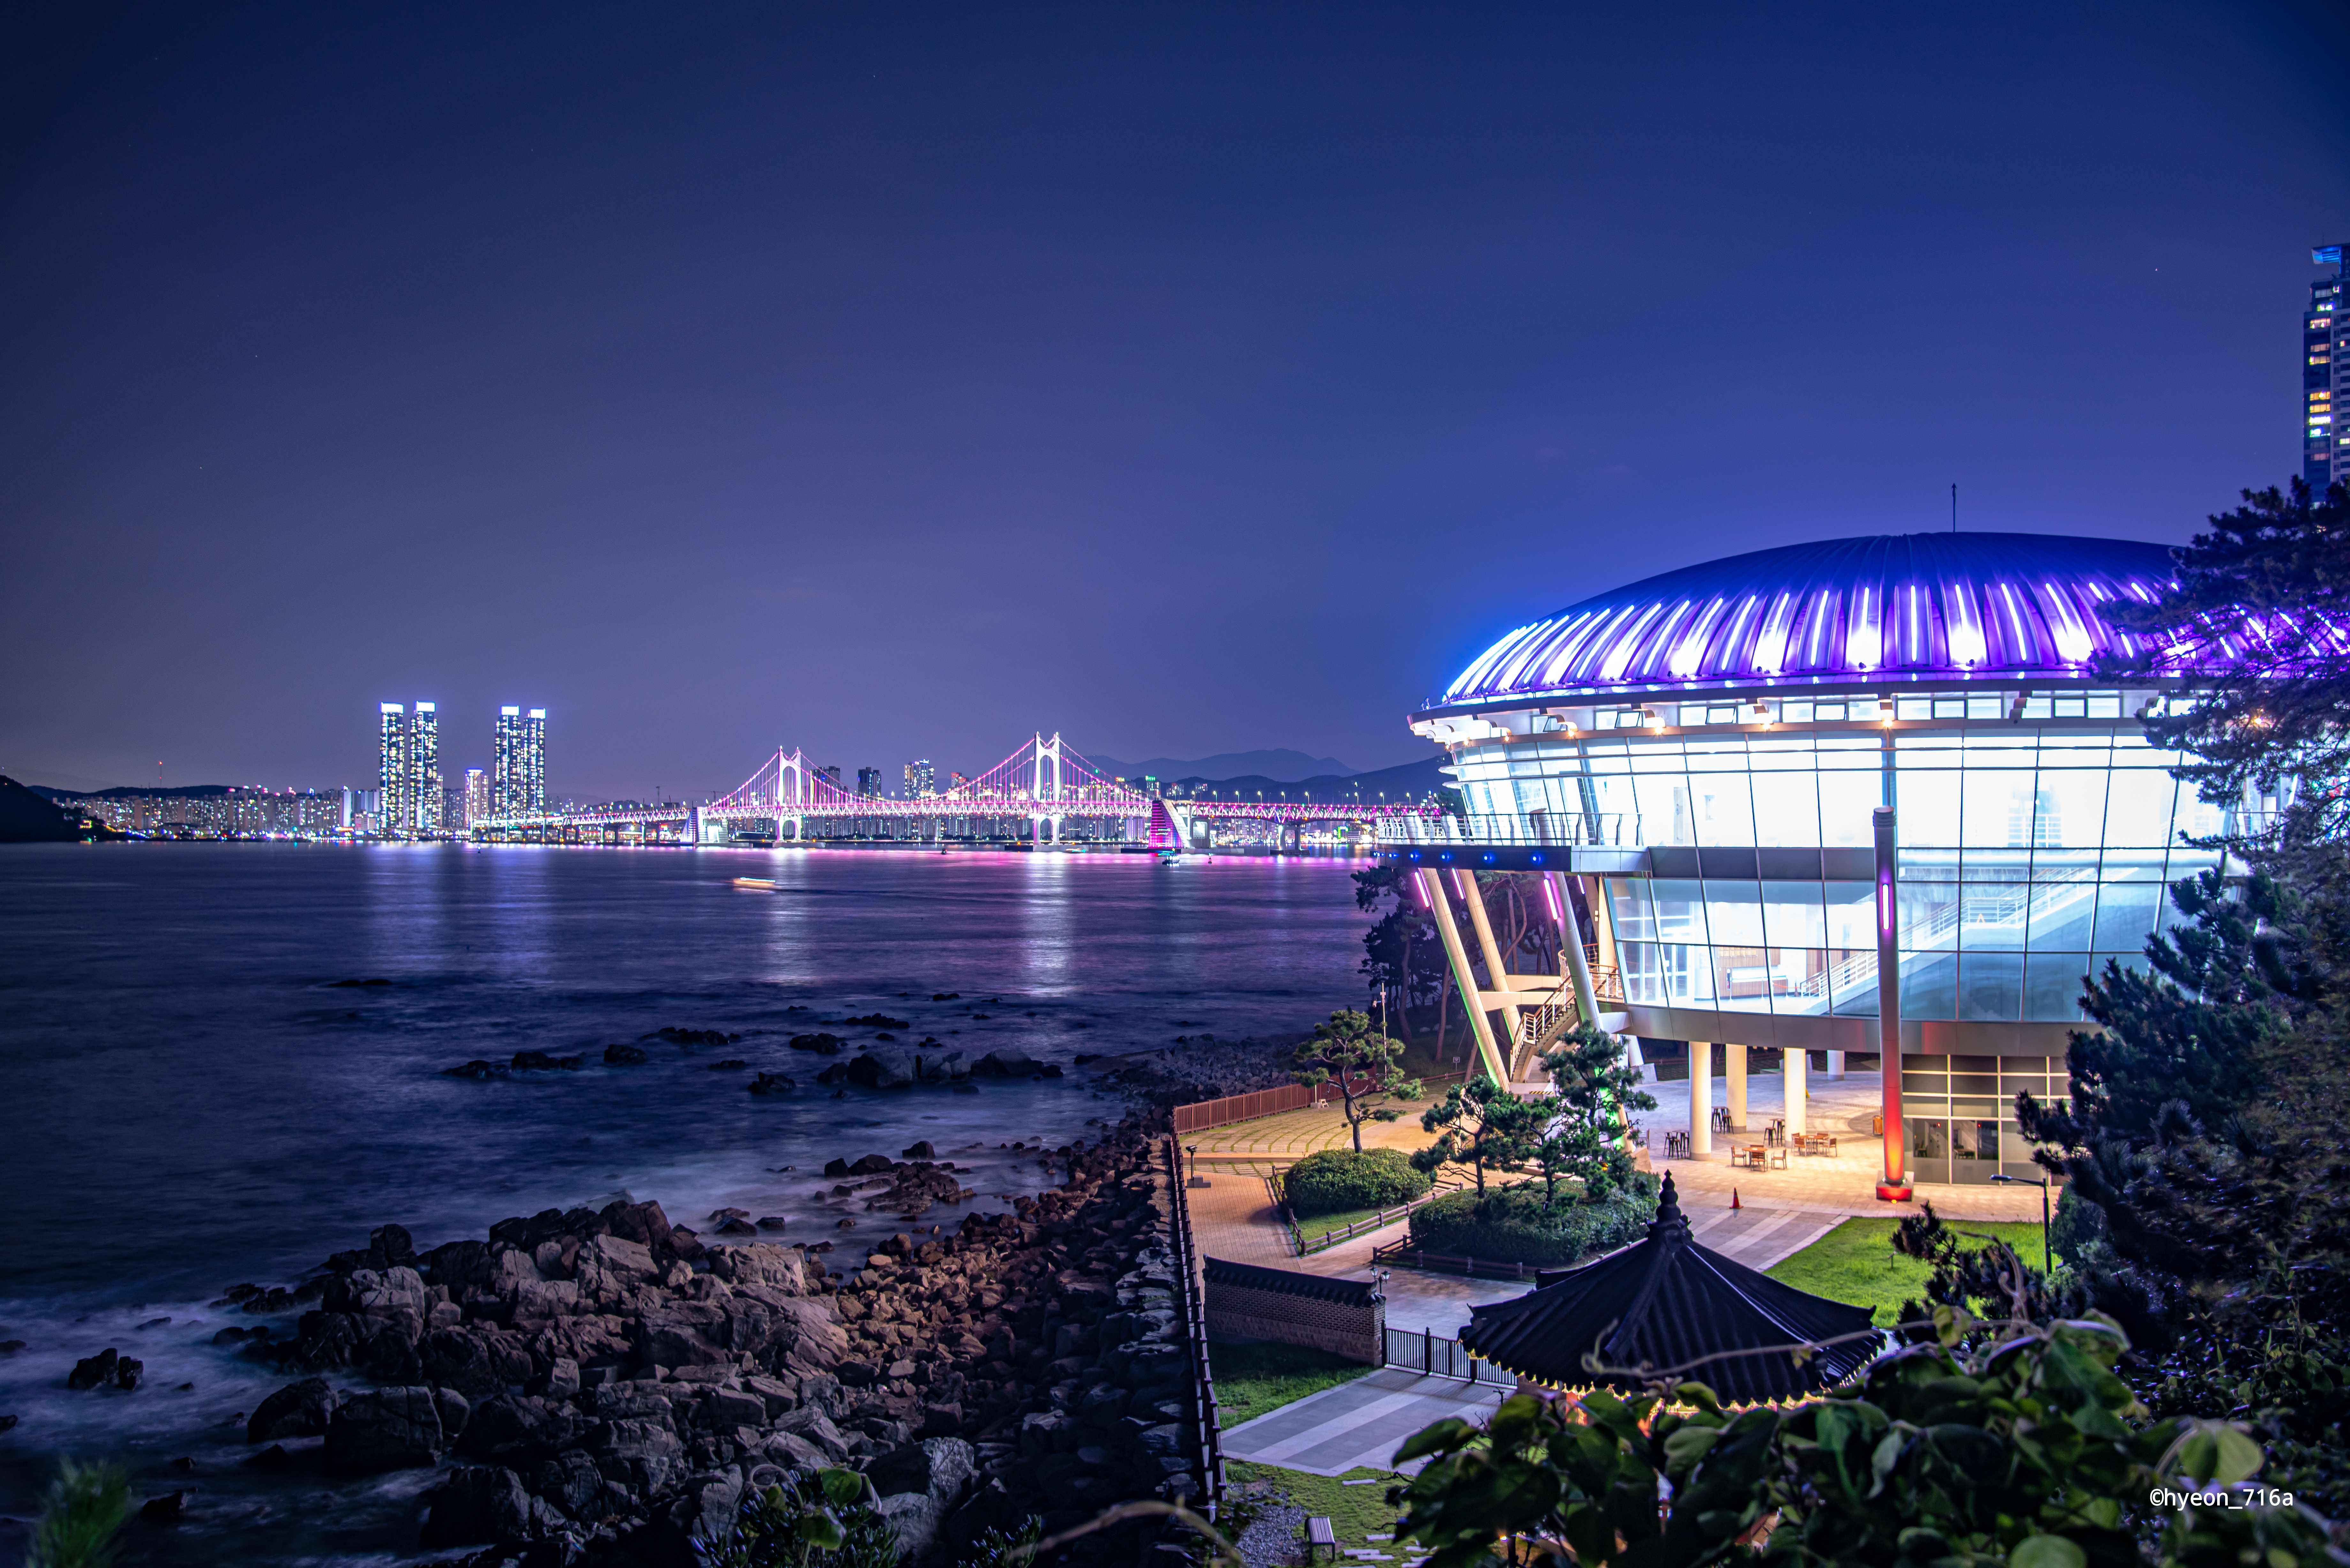 General 7360x4912 Busan night building architecture photography bridge South Korea water lights watermarked